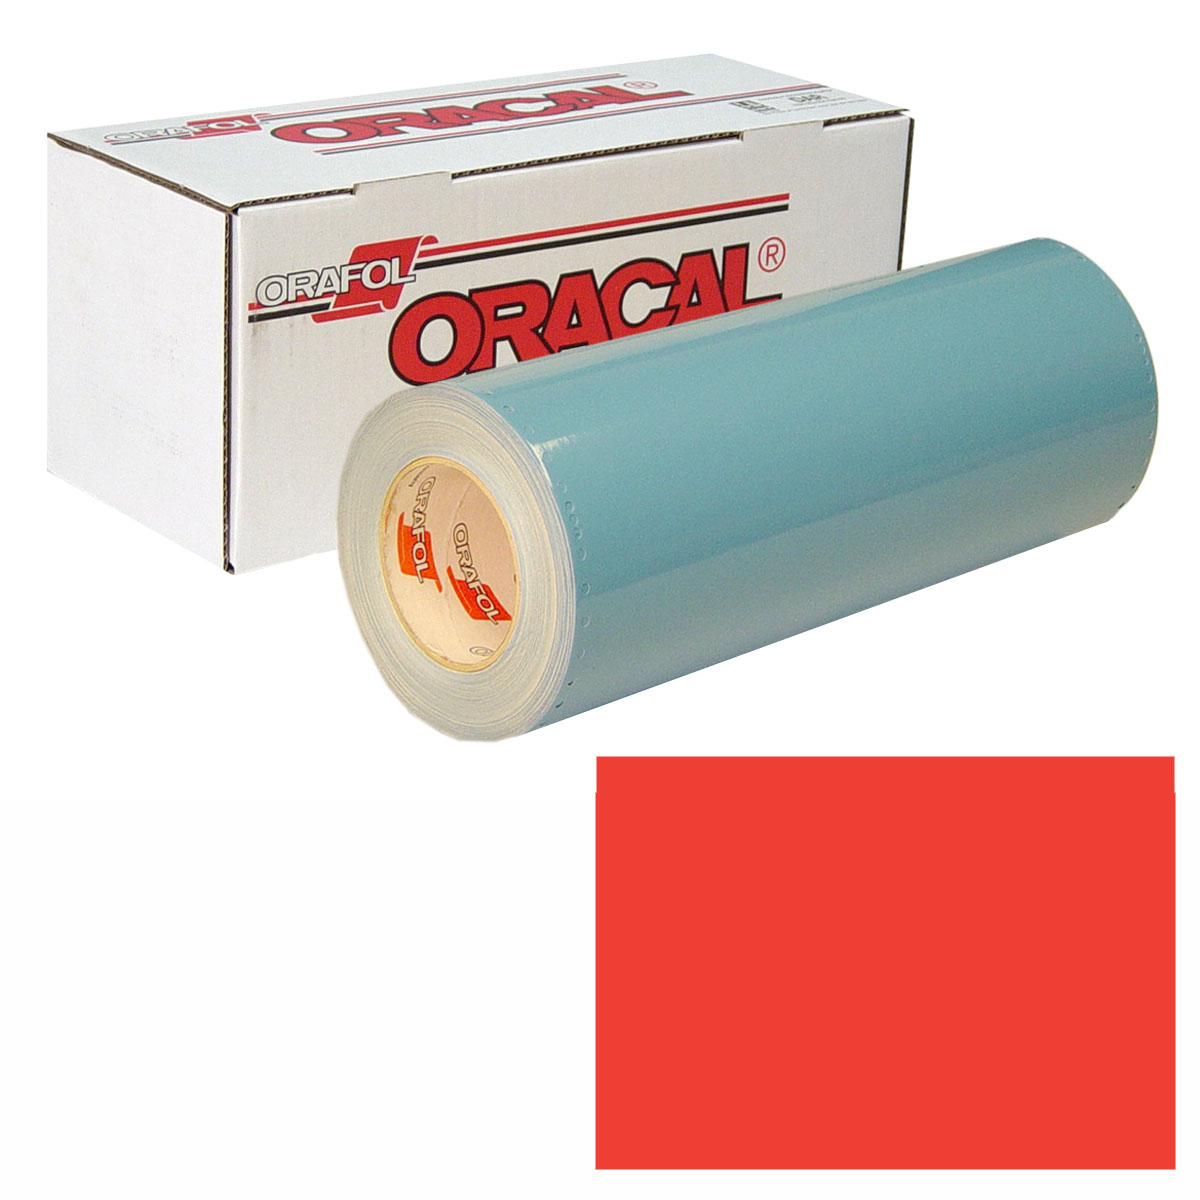 ORACAL 751 15in X 10yd 326 Signal Red